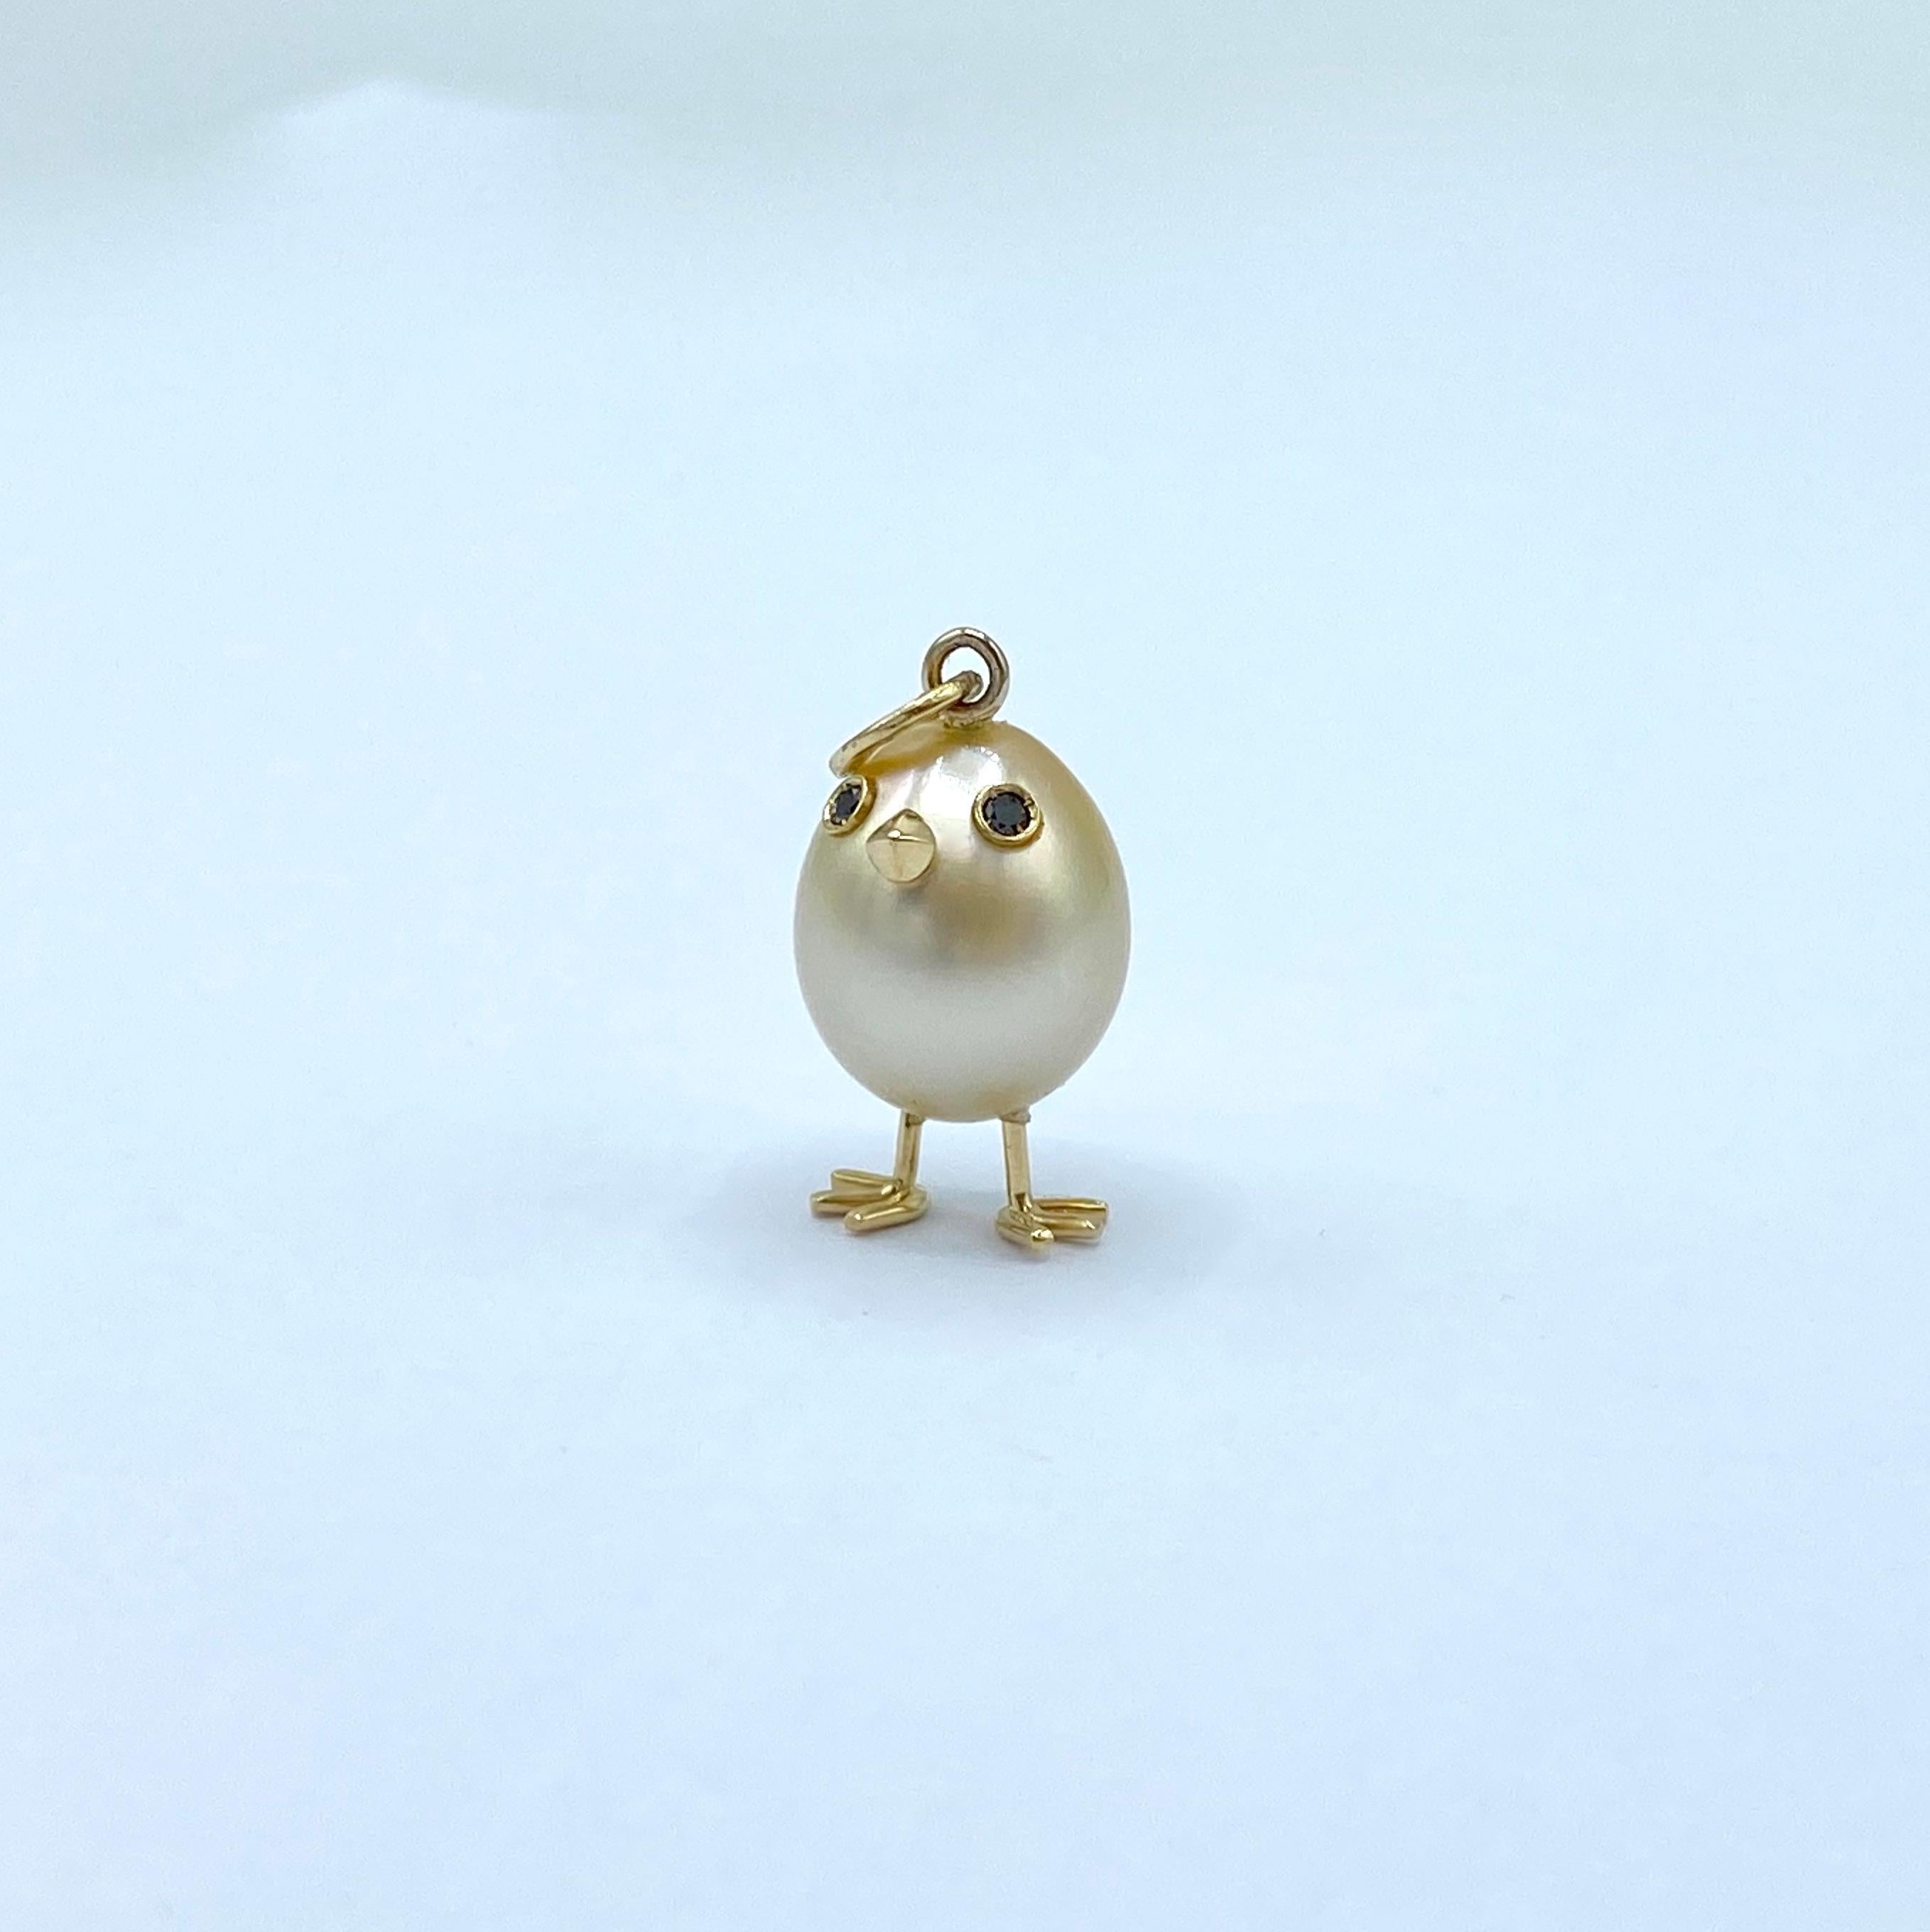 Made in Italy chick pendant in 18Kt gold Australian pearl and black diamonds
With a rare champagne-colored oval Australian pearl, a chick pendant was carefully crafted. 
It has two black diamond eyes, the beak, paws and chain ring are made of 18Kt